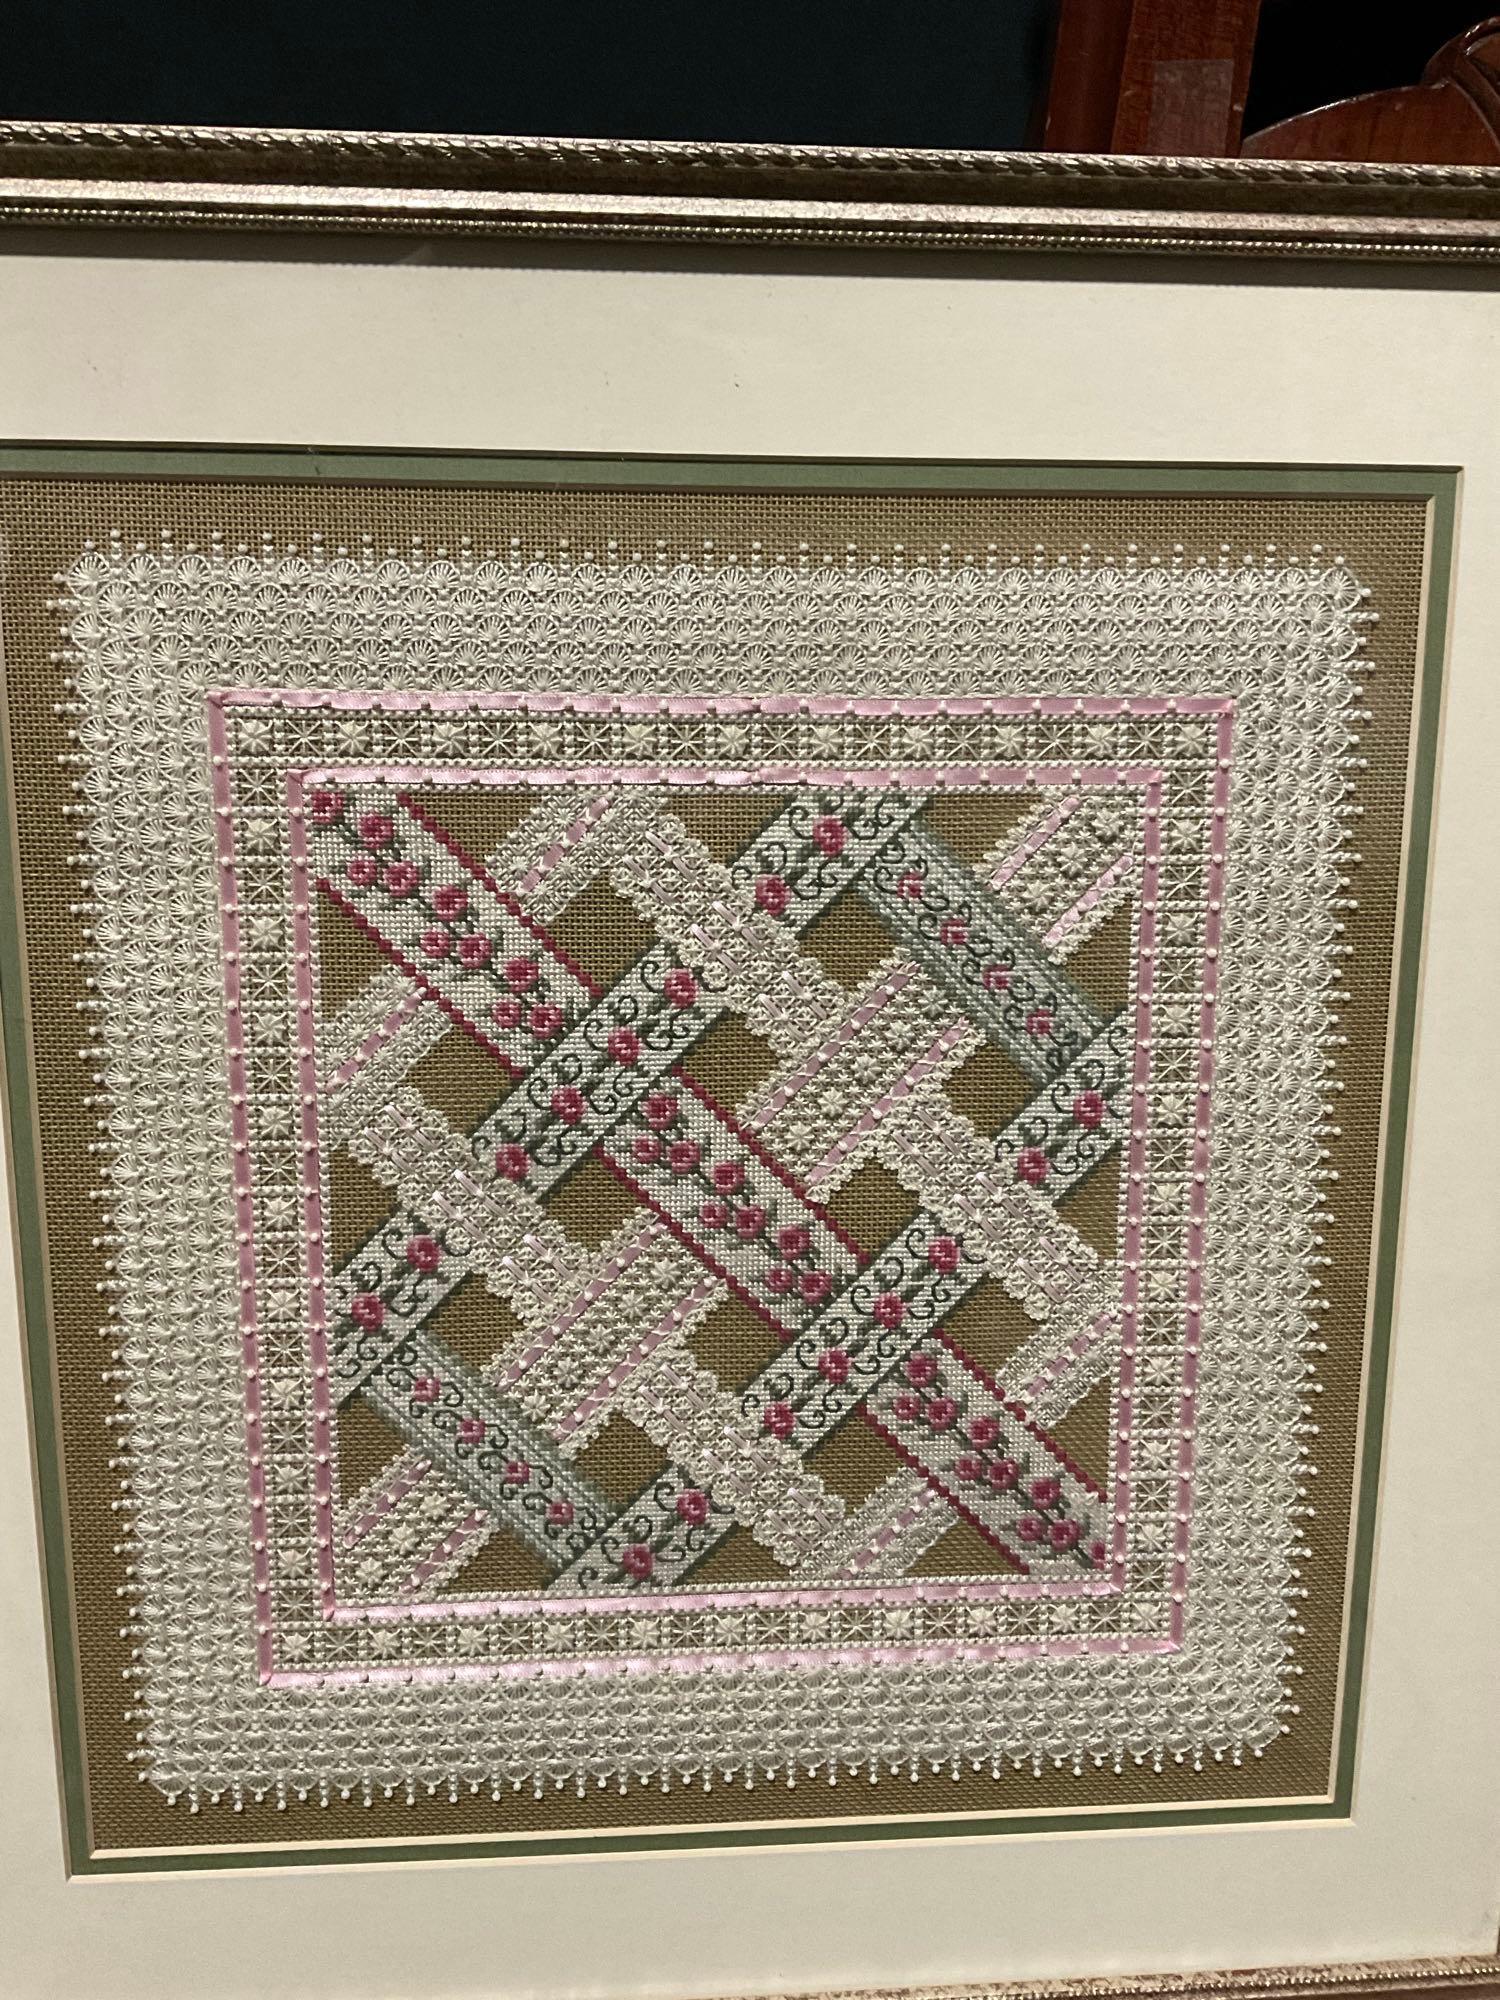 Pair of Framed Embroidered Lace Sampler Pieces